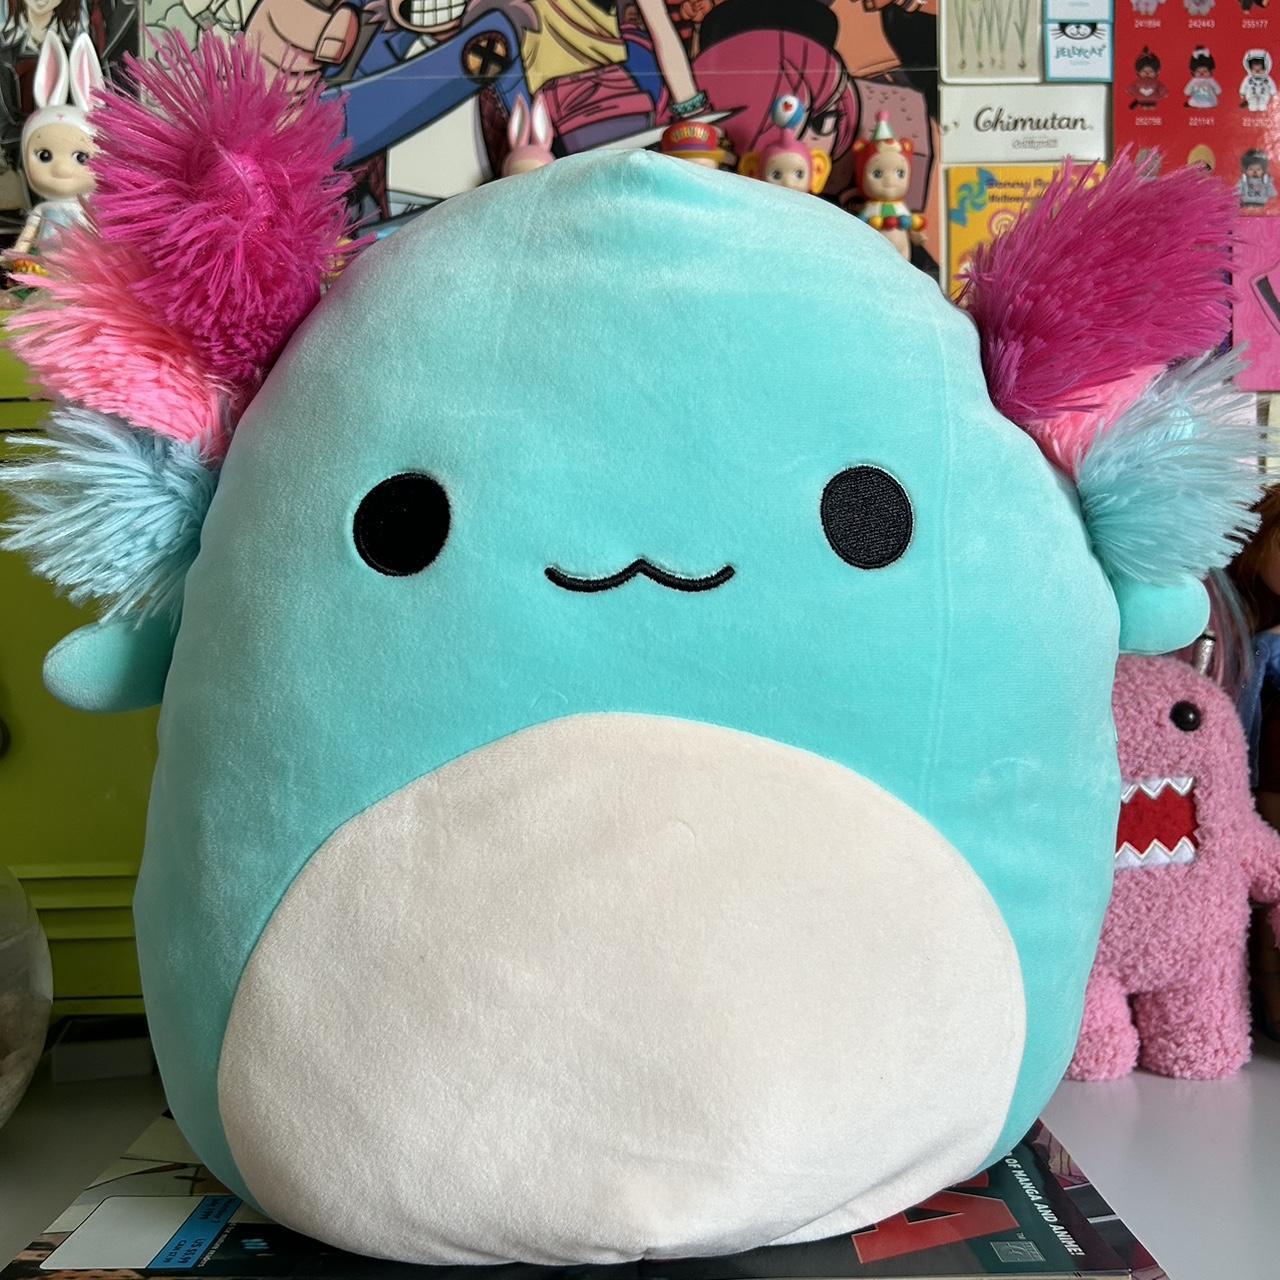 today i got the squishmallows with the ugly anime eyes, they looked lonely  and i couldn't help it 🥺 : r/squishmallow